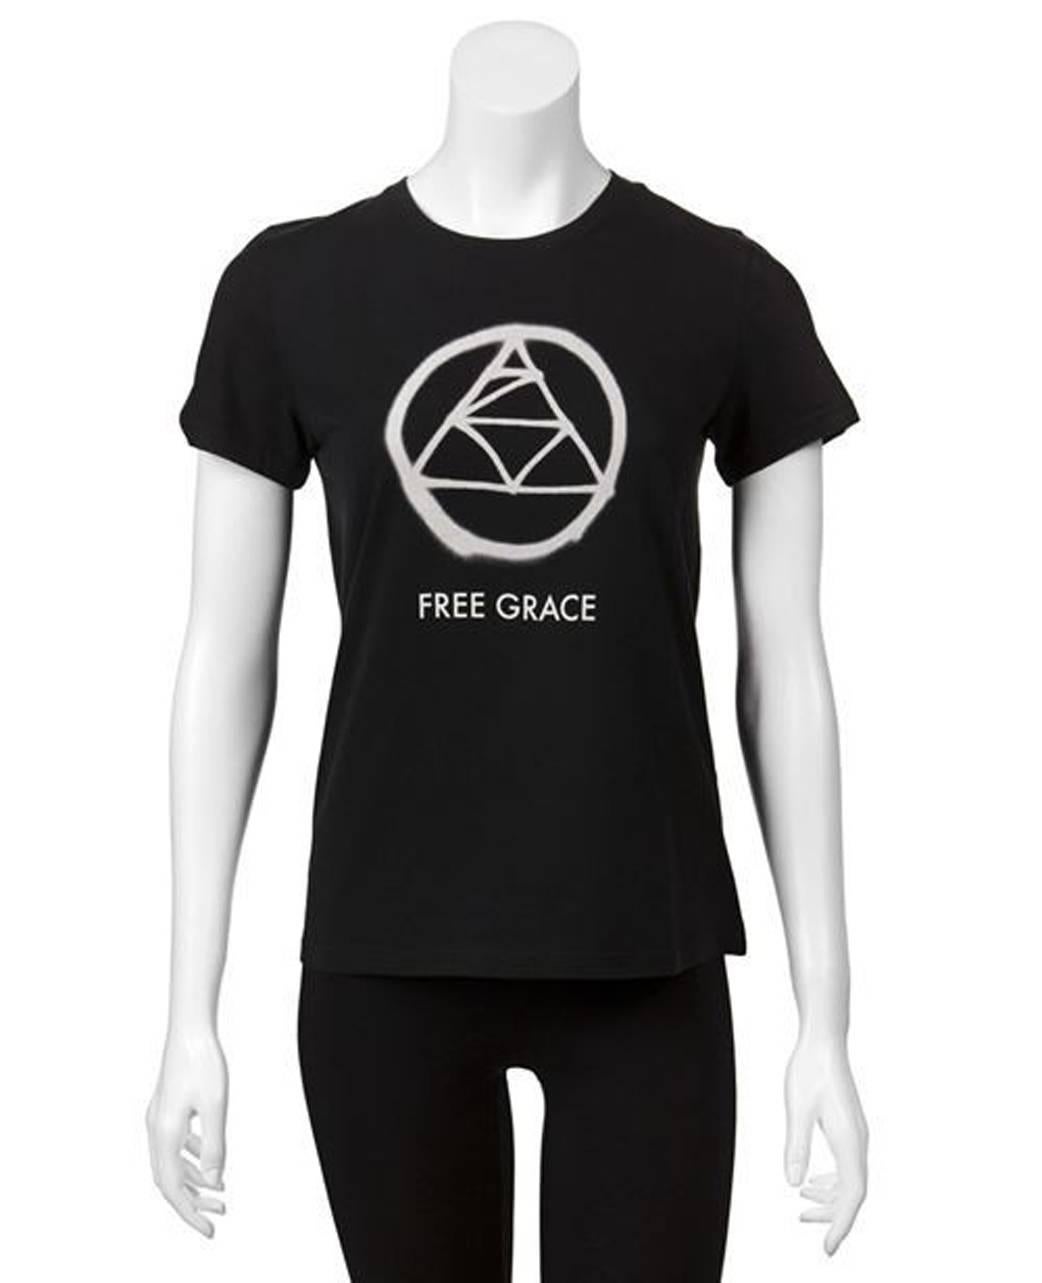 Undercover Clothing 2009 Grace Collection black cotton t-shirt featuring a spray painted graphic and 'Free Grace' printed across the front and spray painted text across the back. New with Tags.